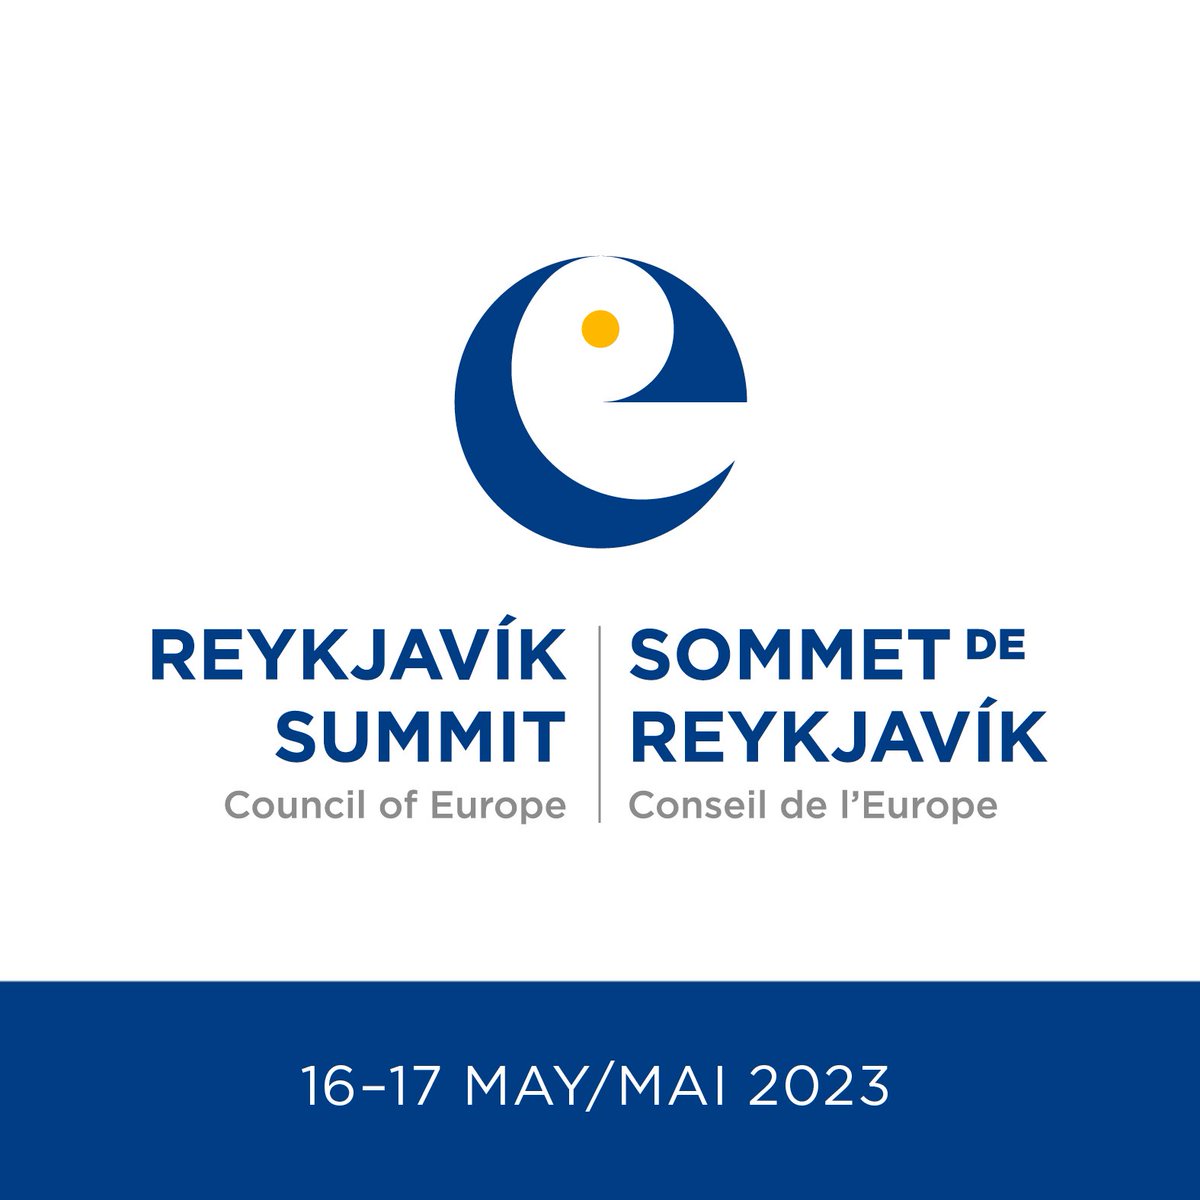 Only a few days remain until the #CoEReykjavikSummit! 🇱🇻 looks forward to a real and lasting positive impact for citizens of Europe in all pillars of @coe - democracy, human rights and rule of law. Support to UA & need for accountability remains a priority #StandWithUkraine